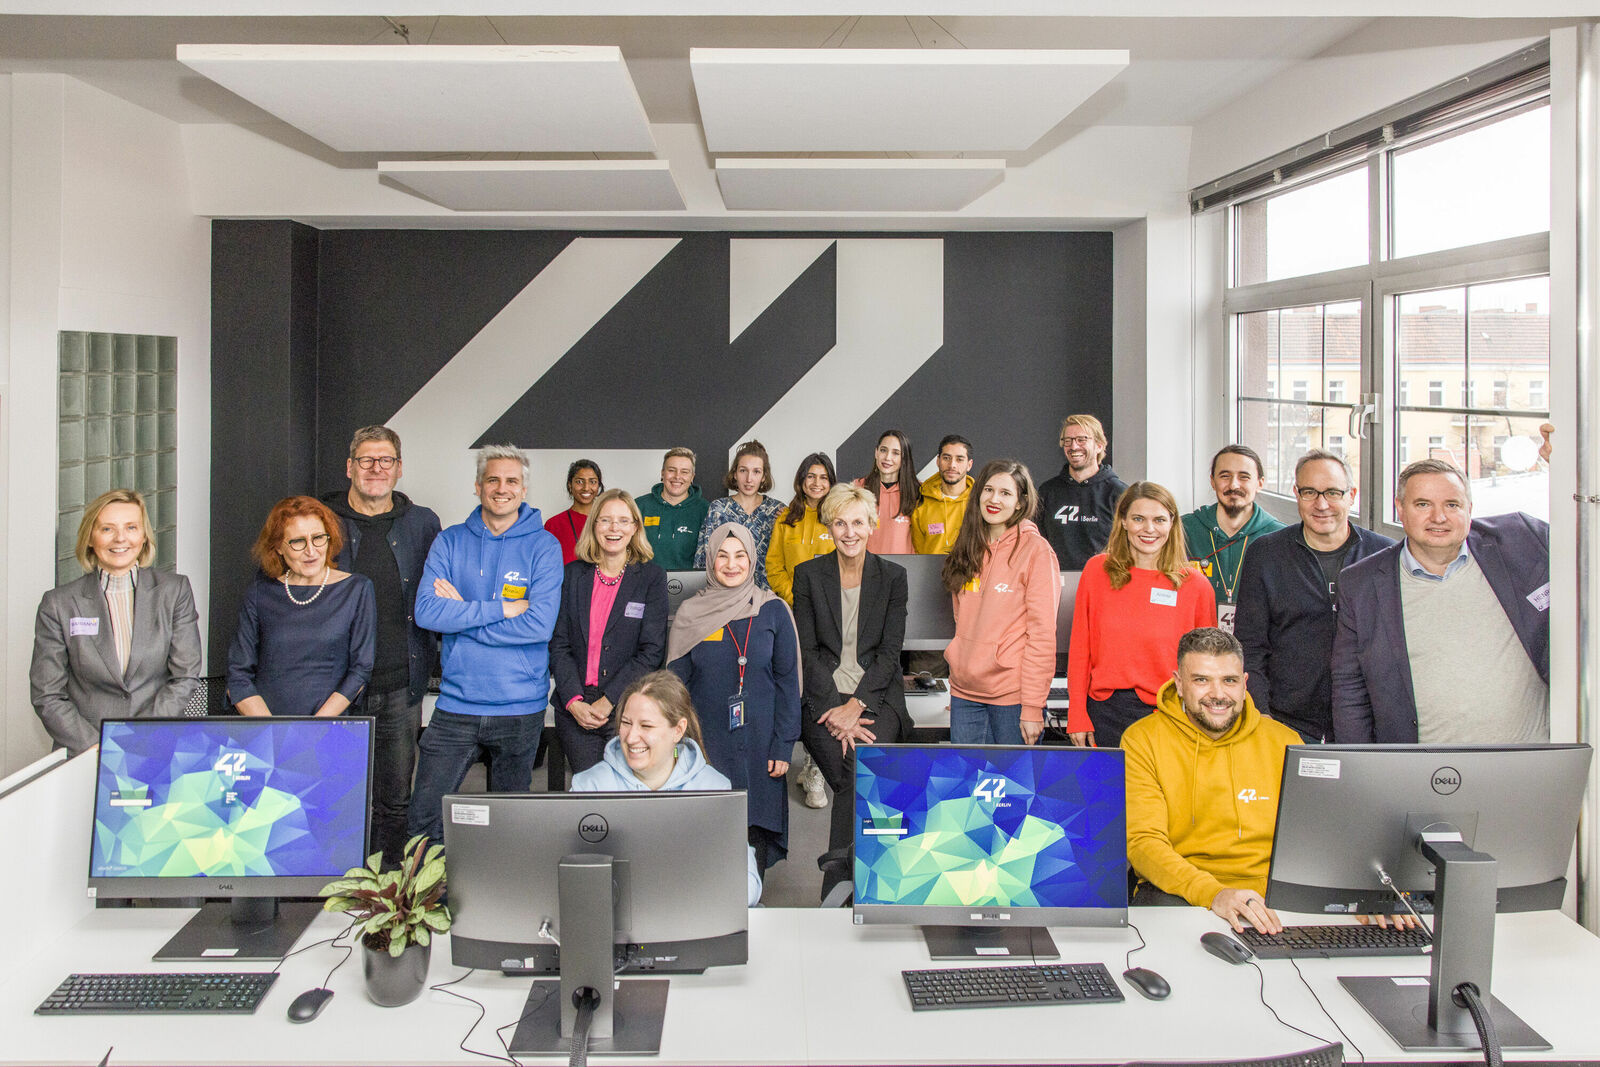 Closing the skilled-labor gap together: Volkswagen and CARIAD support the 42 Berlin coding school